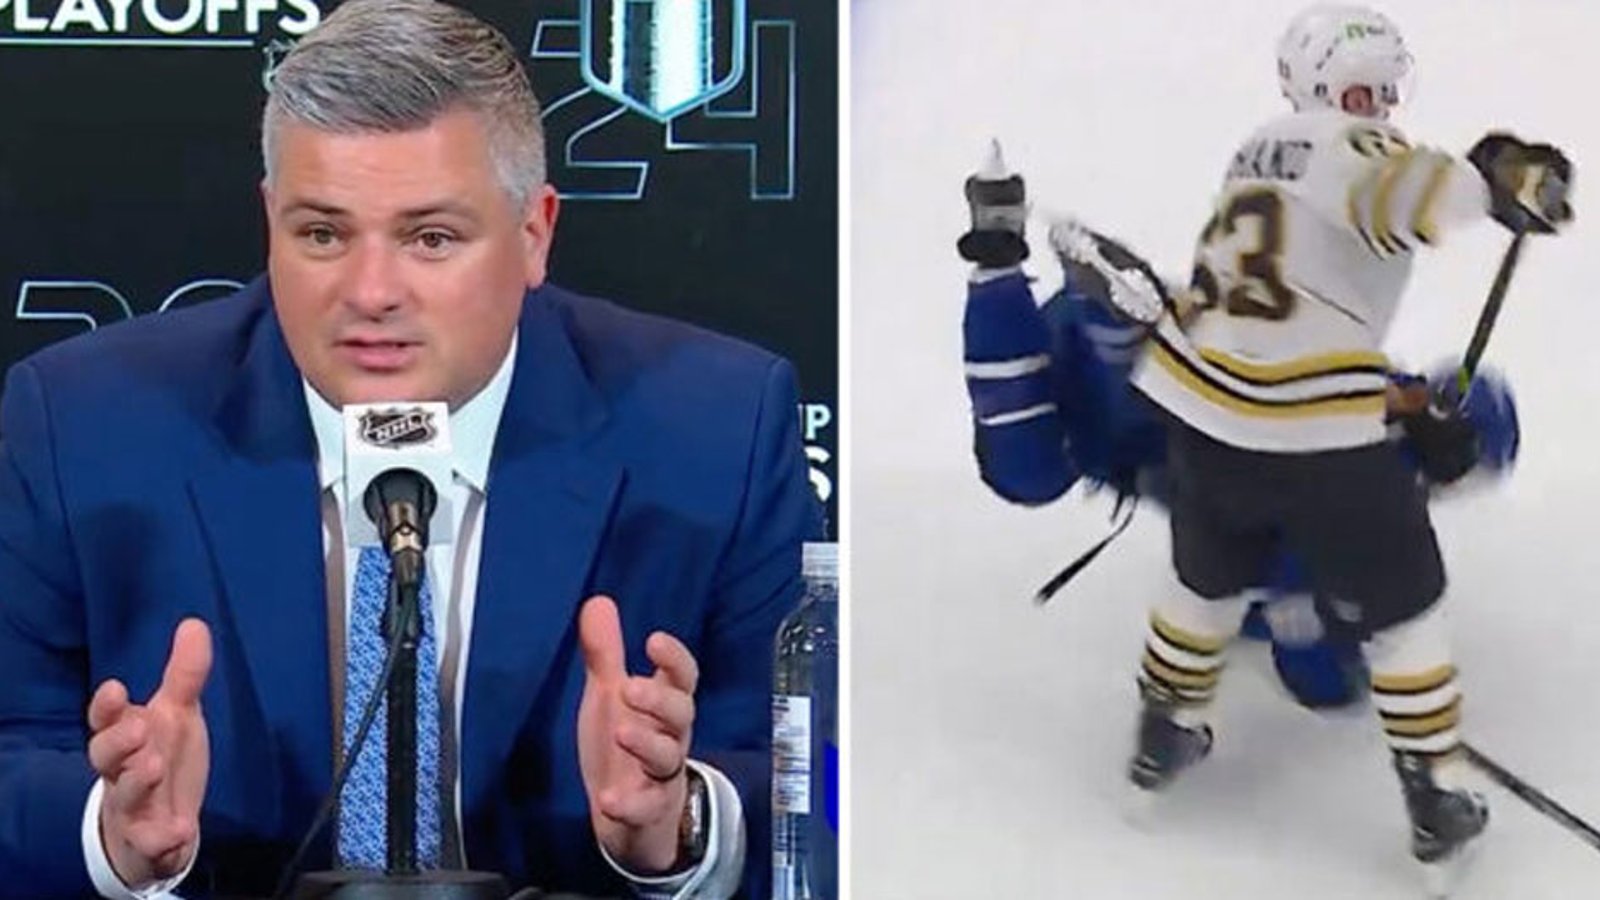 Leafs coach complains that Brad Marchand gets away with dirty plays unpenalized